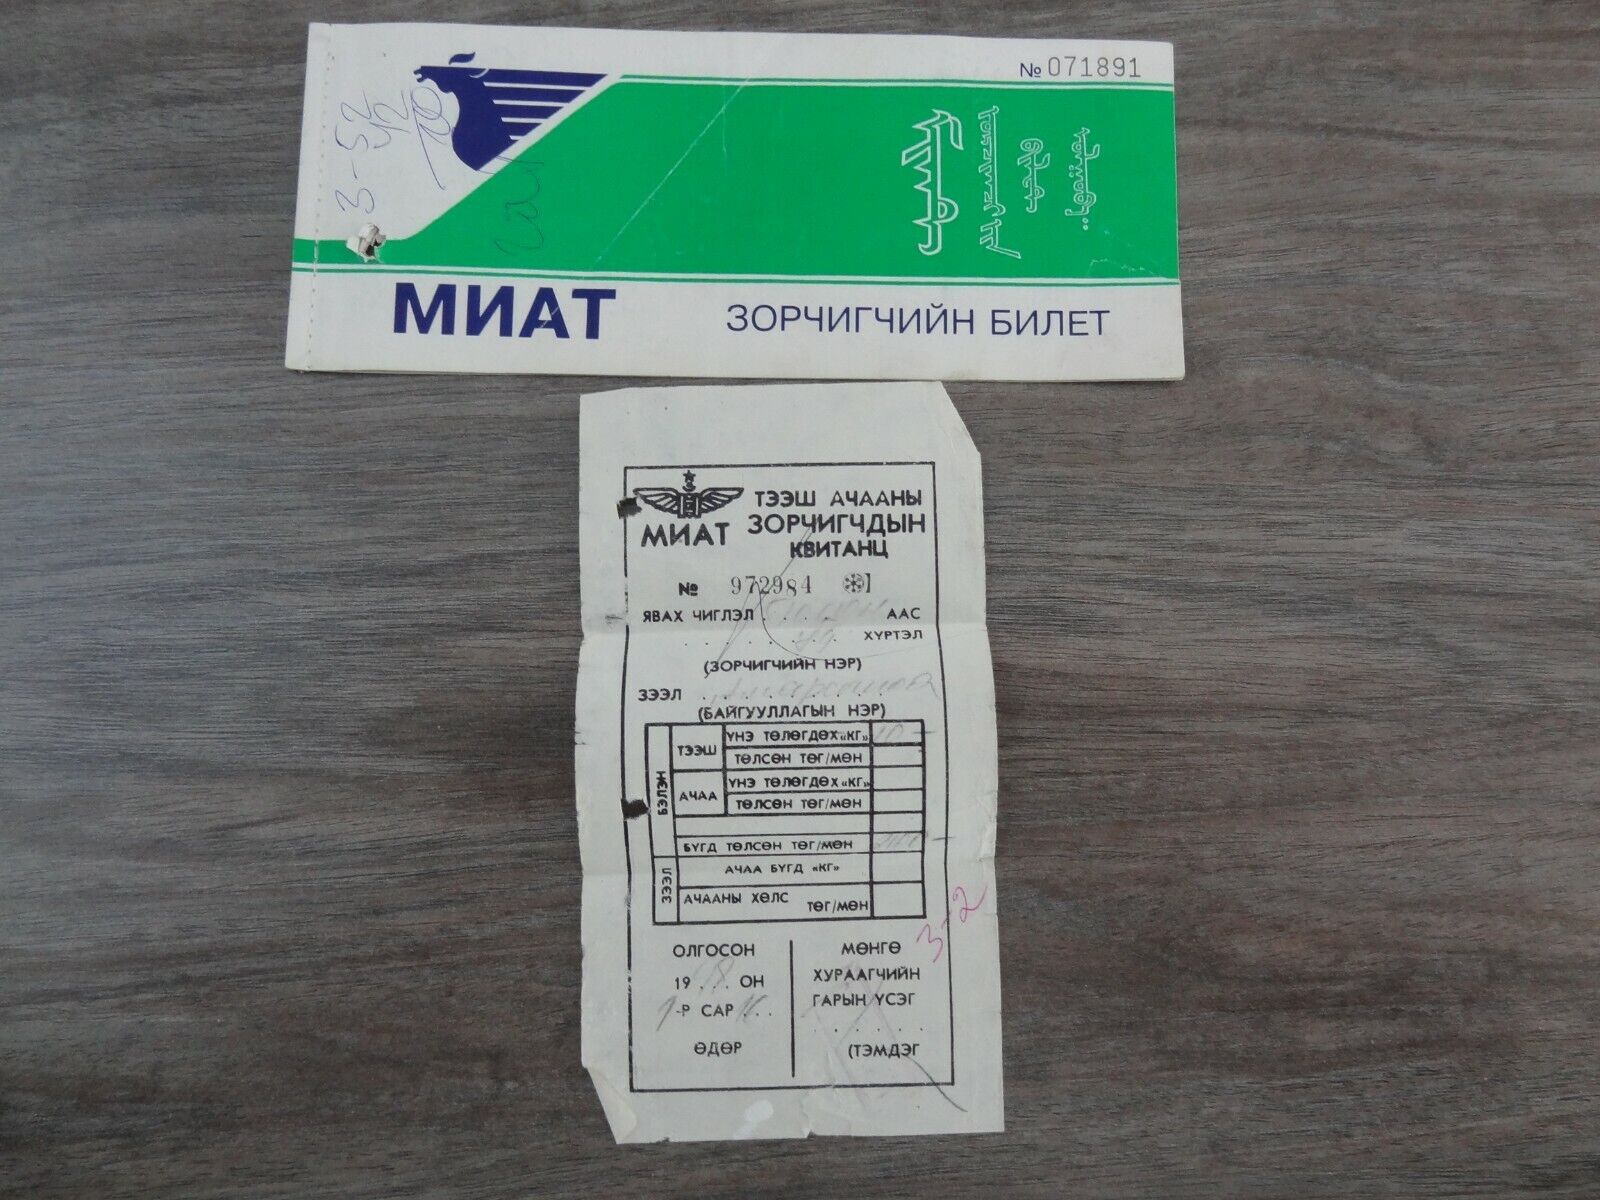 VINTAGE MONGOLIAN AIRLINE MIAT DOMESTIC FLIGHT TICKET BOARDING PASS WITH STUB